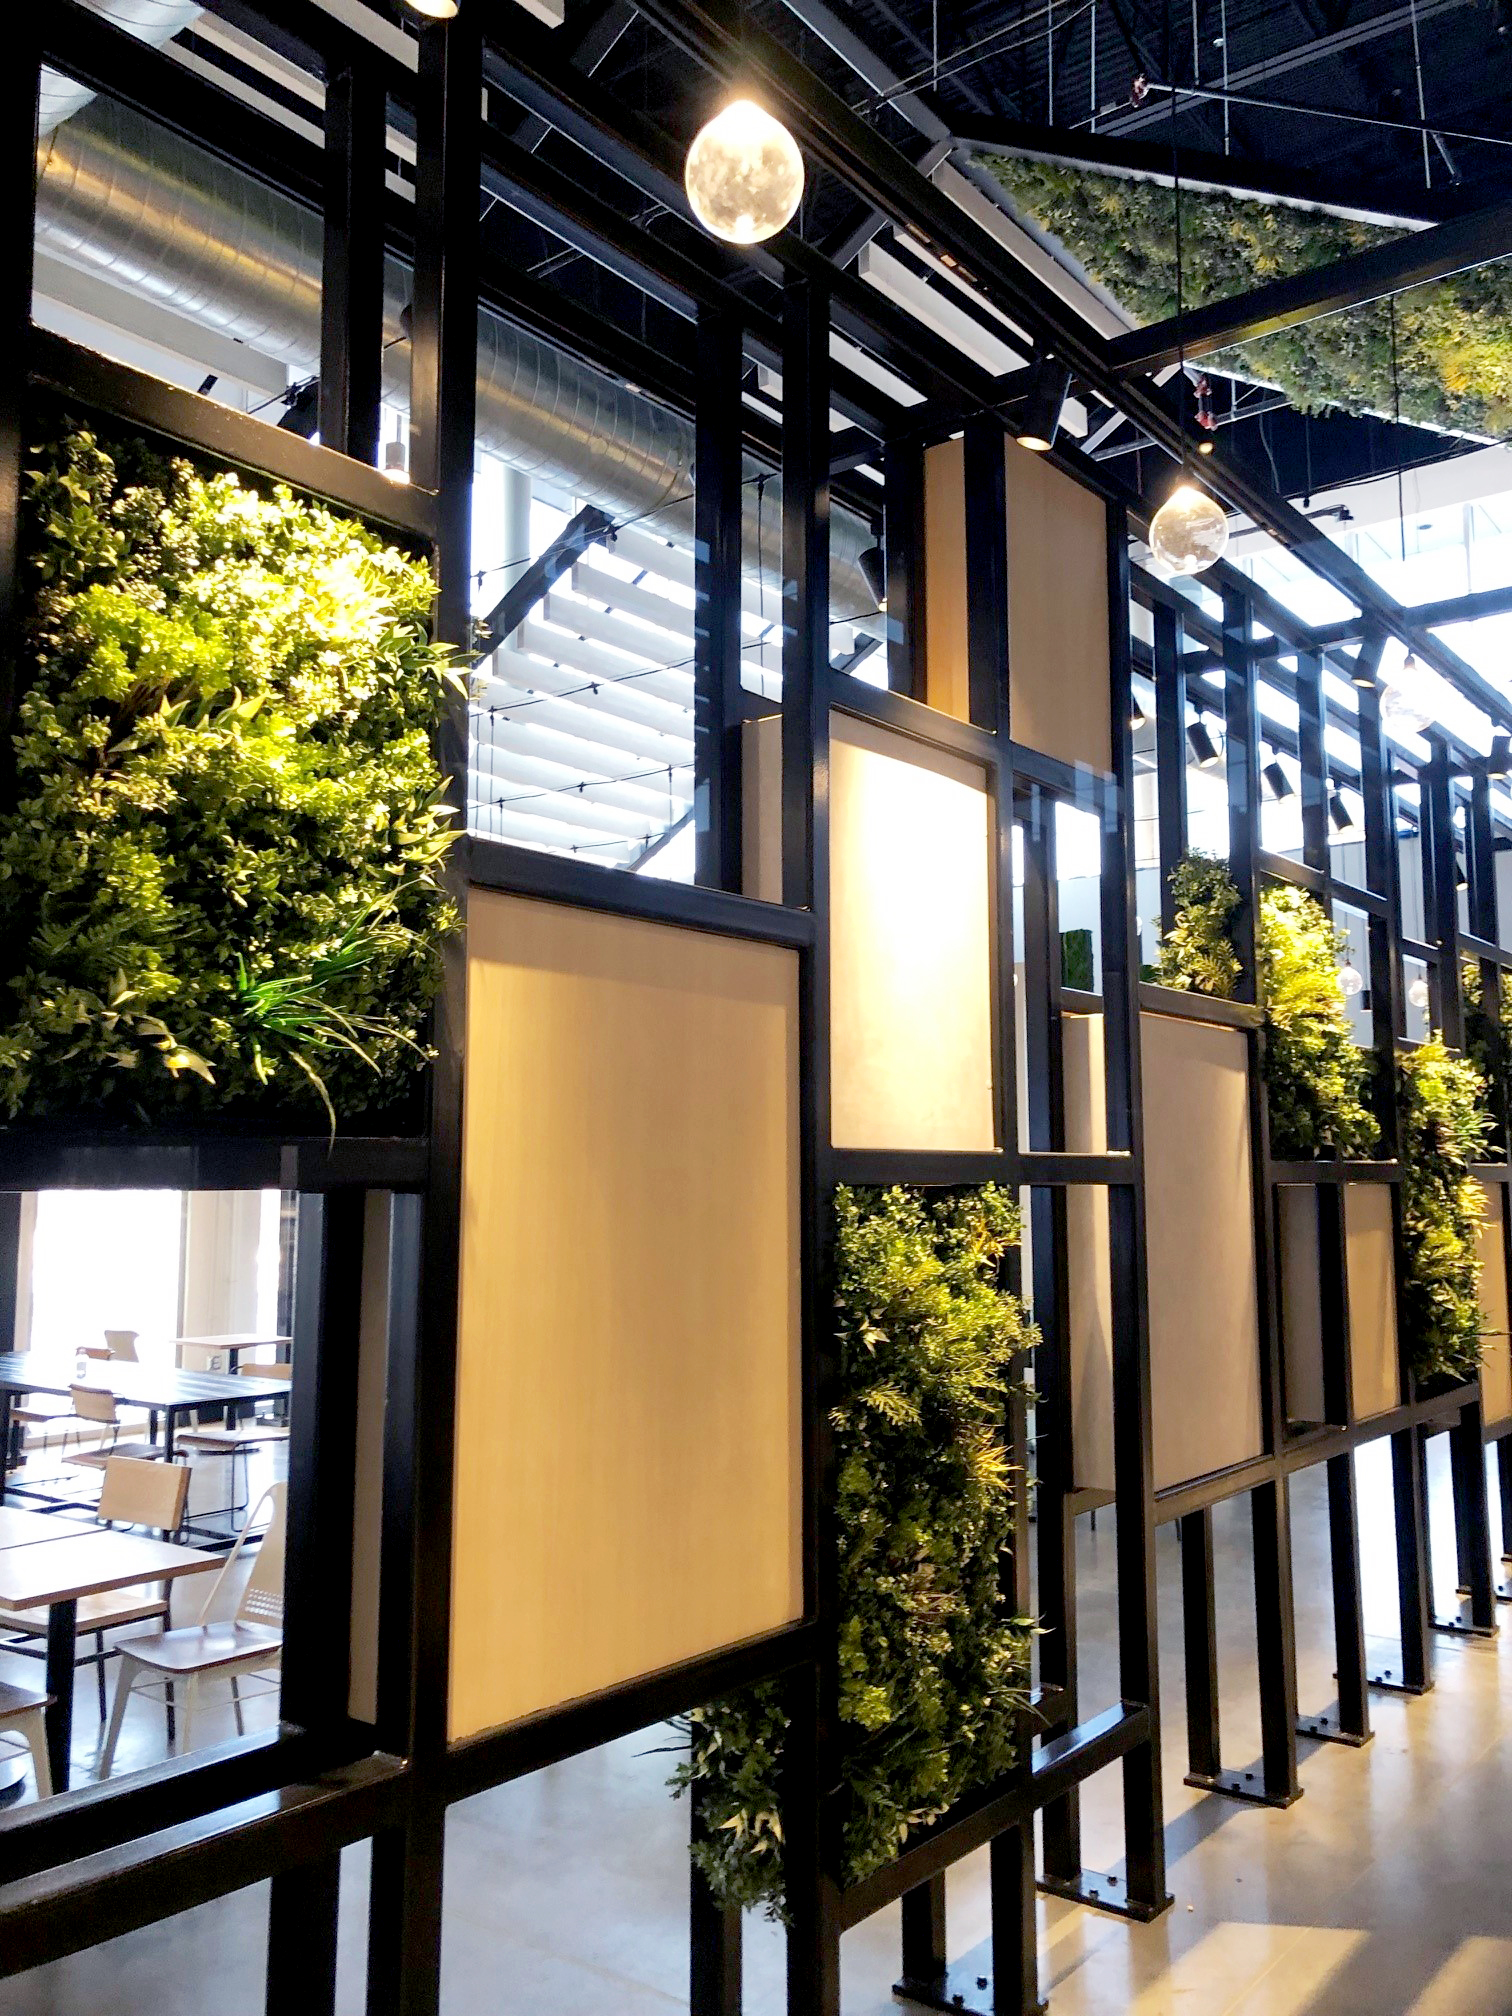 Restaurant with an artificial living wall